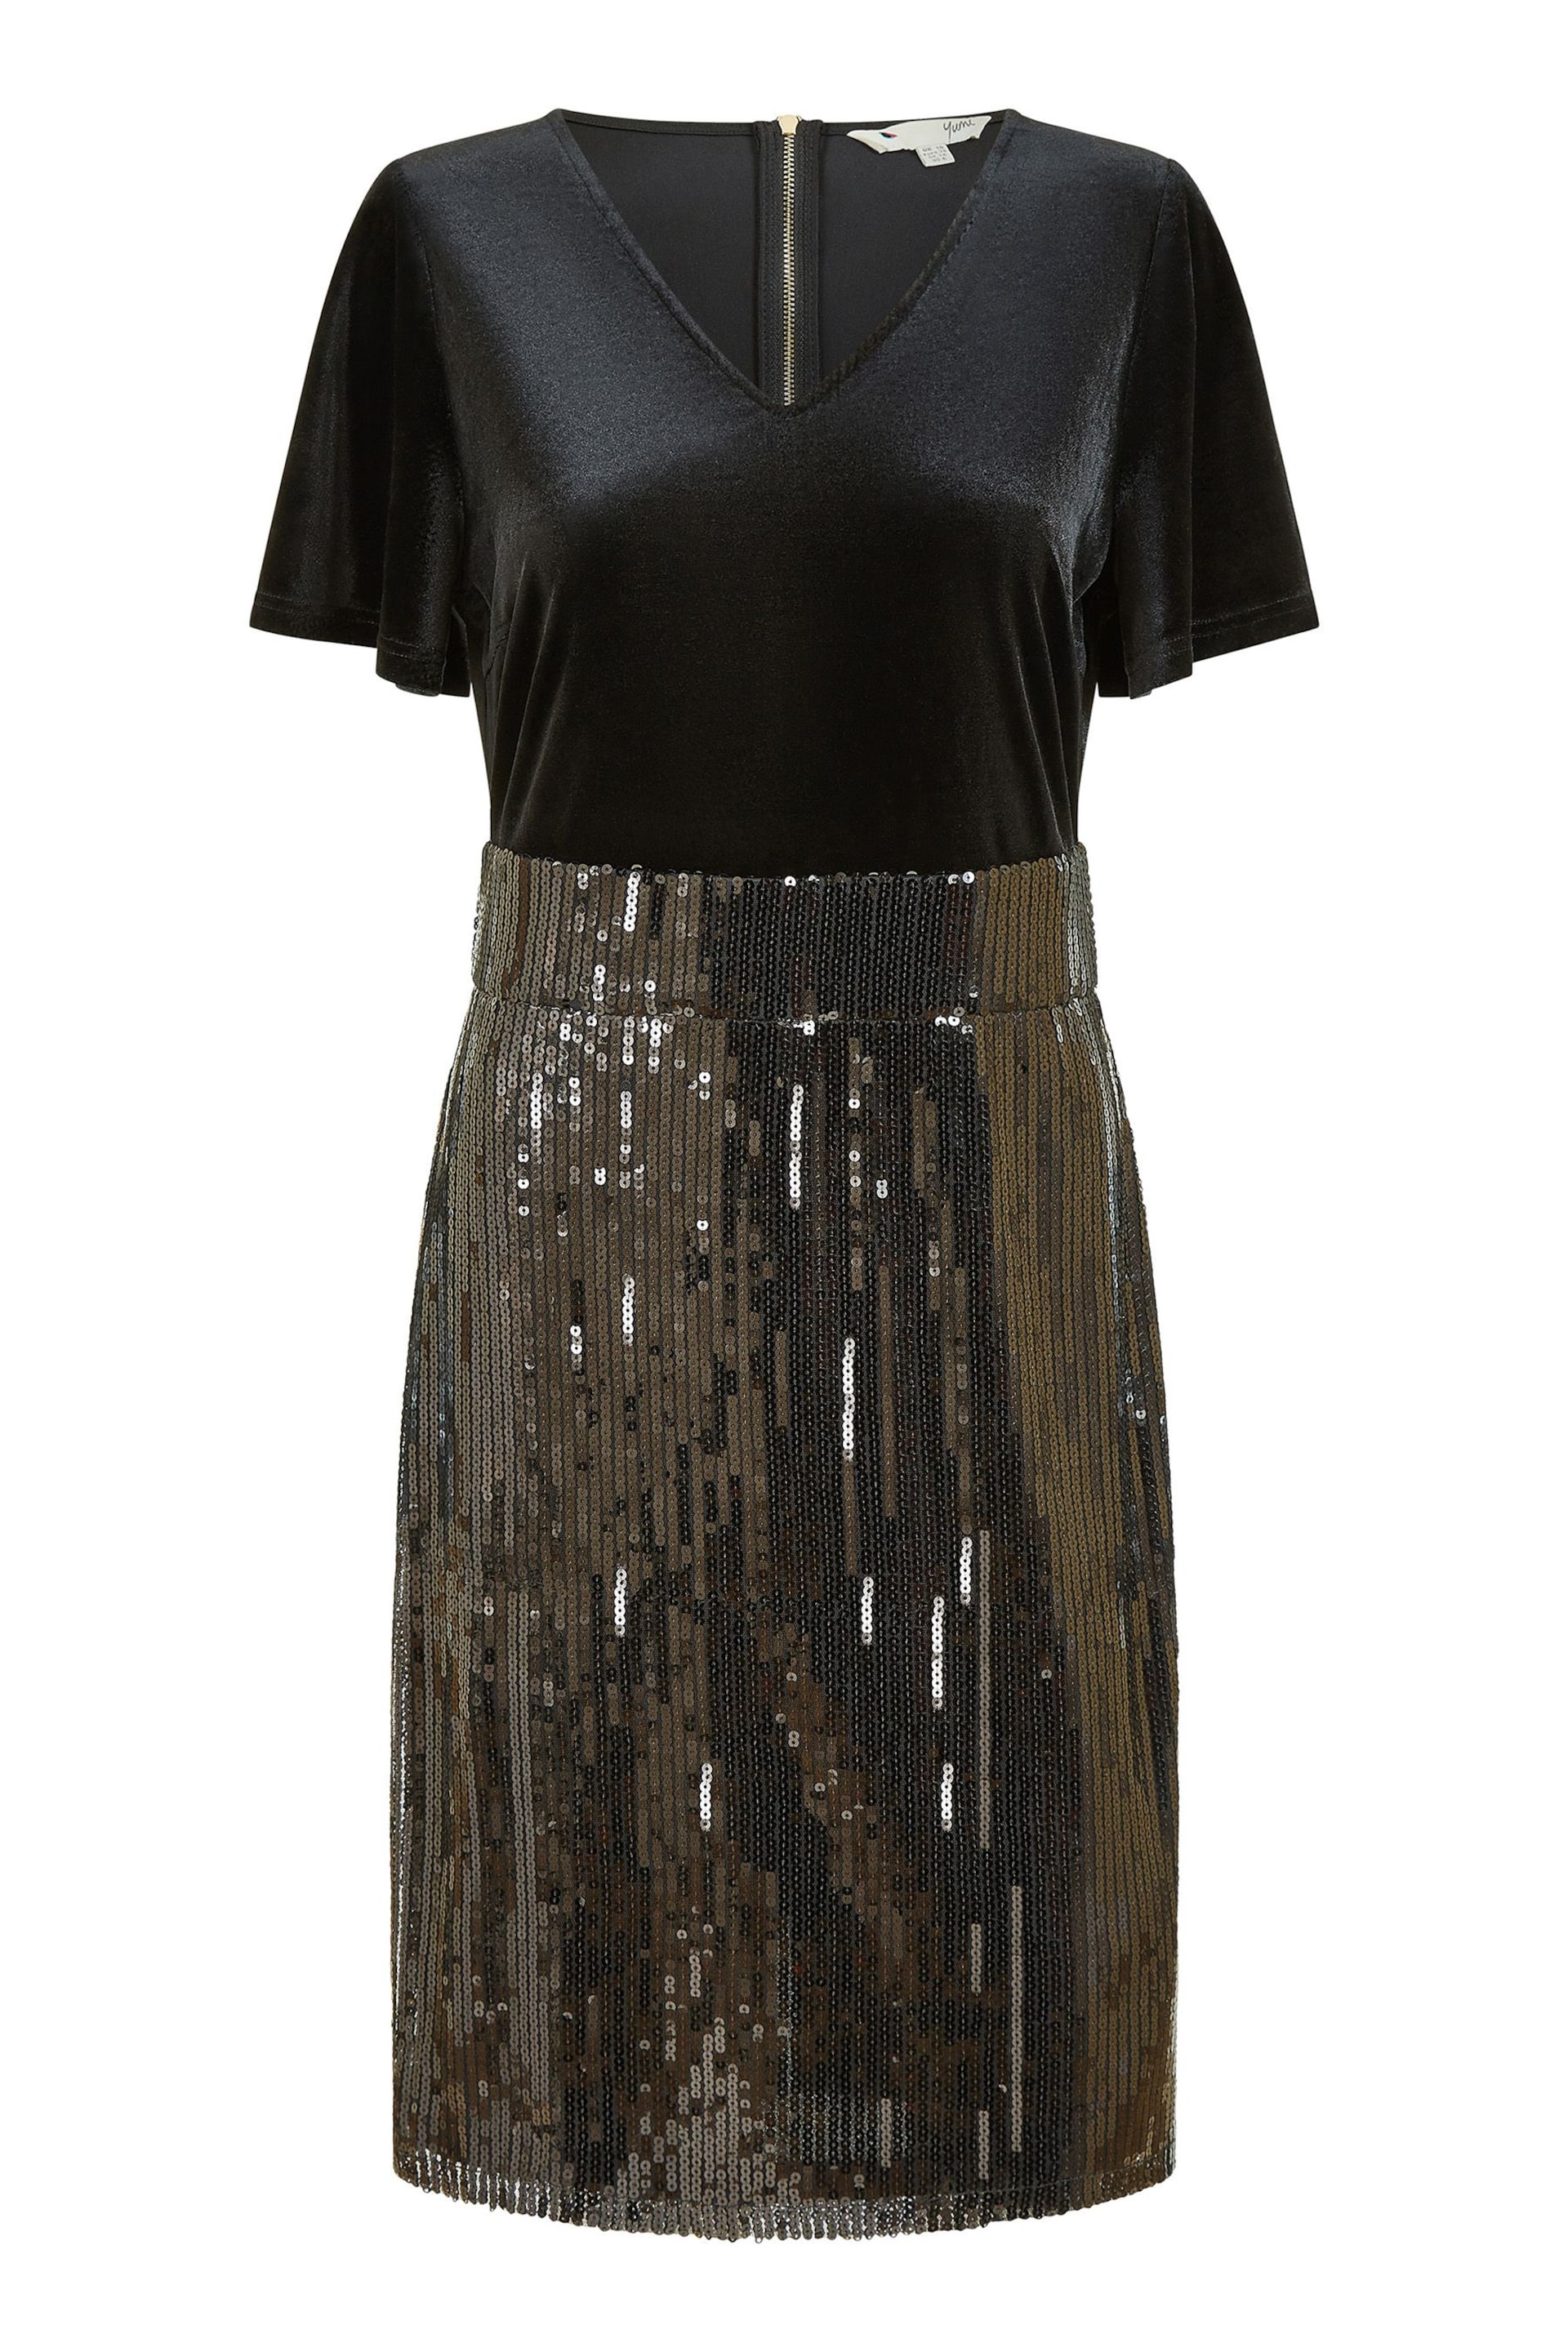 Yumi Black Velvet And Sequin Fitted Dress - Image 5 of 5